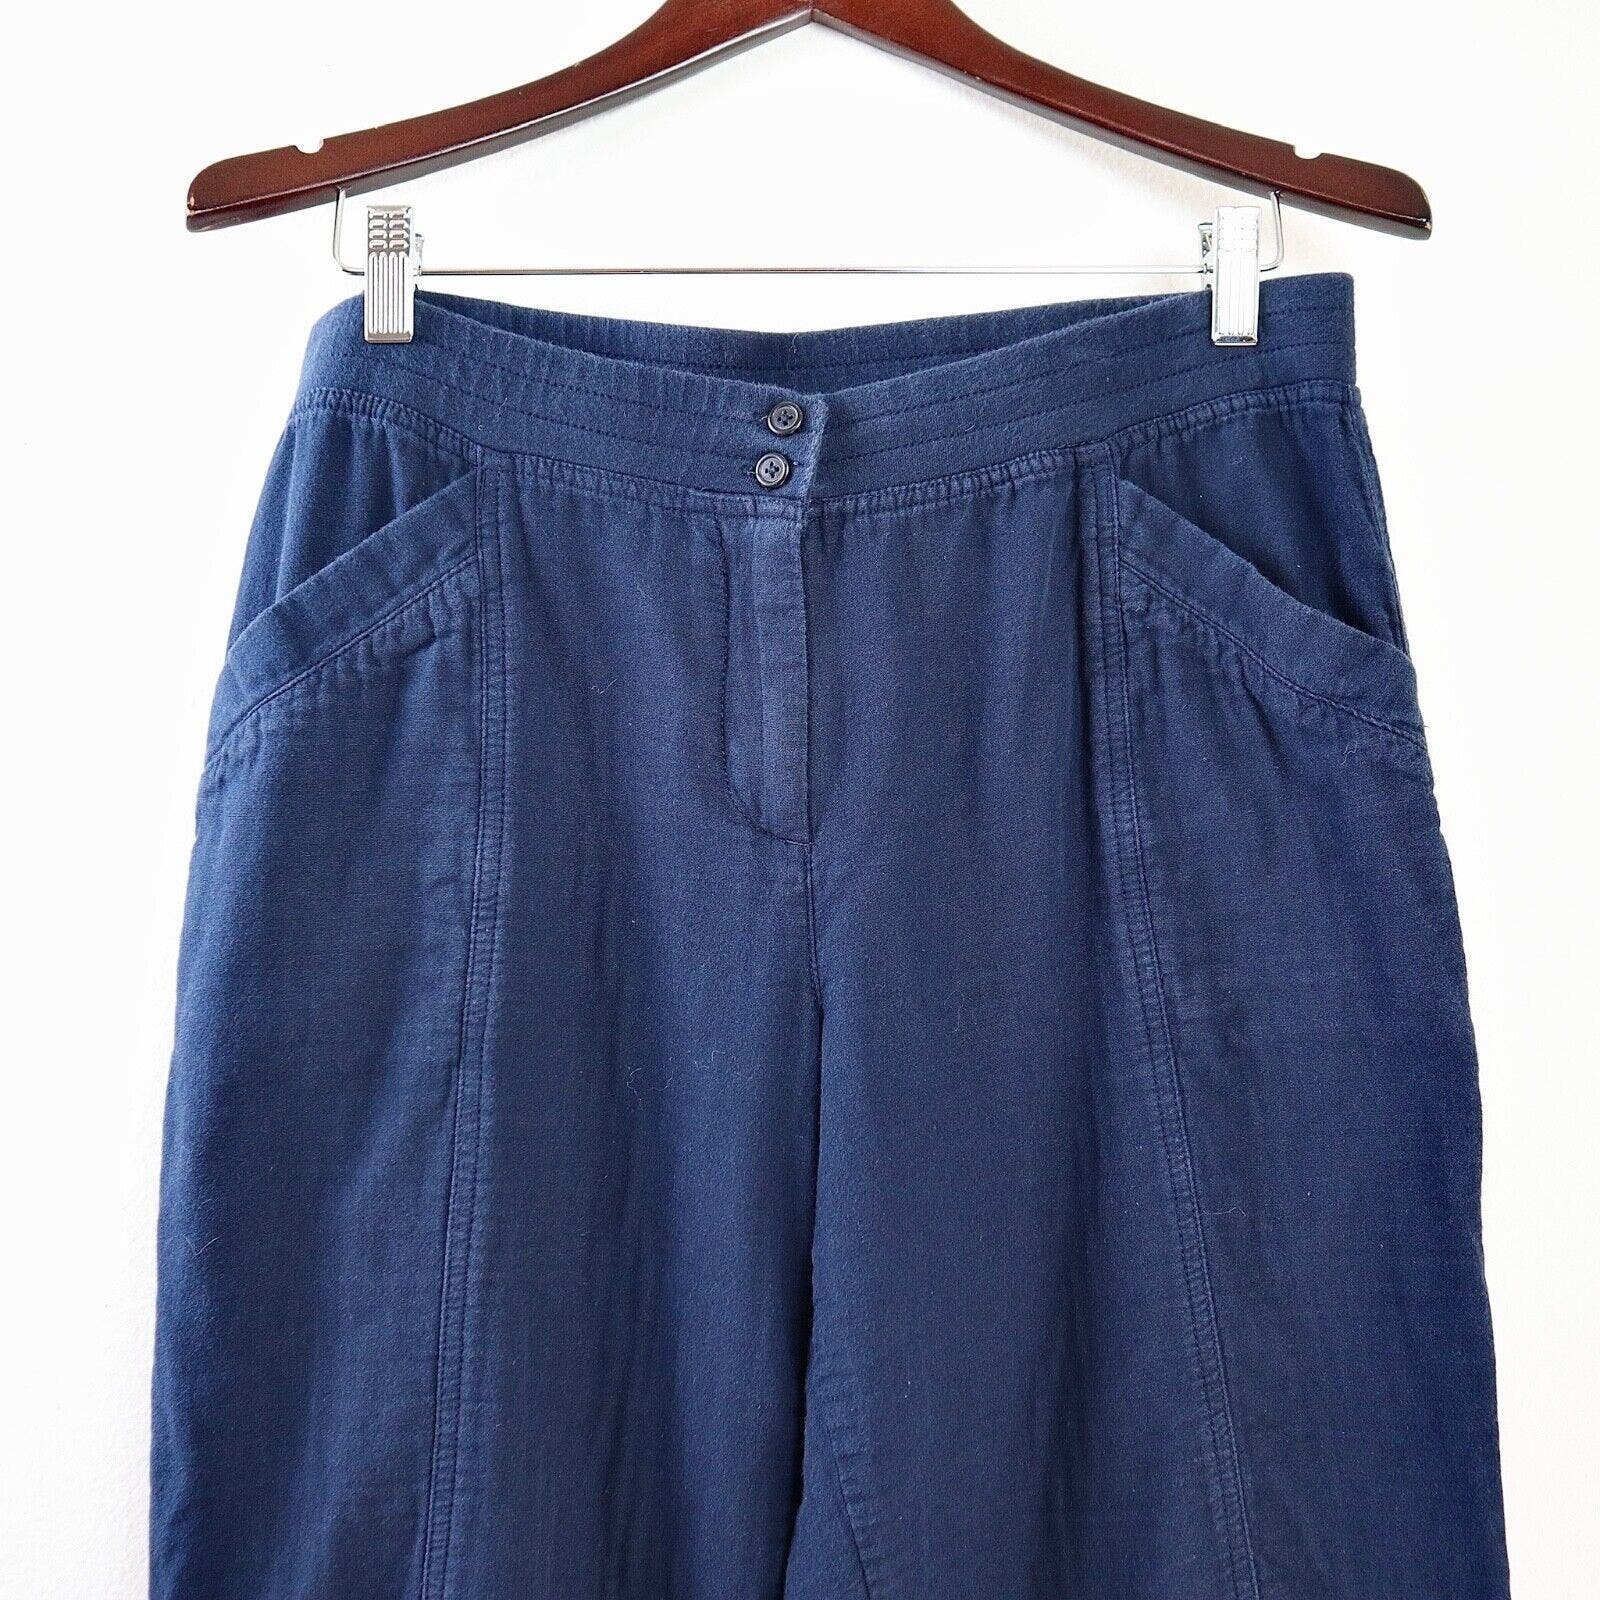 The Best Seller J Jill Size 10 High Rise Roll Cuff Chino Pant Cotton Heavy Gauze Blue Go2lObzP6 for sale